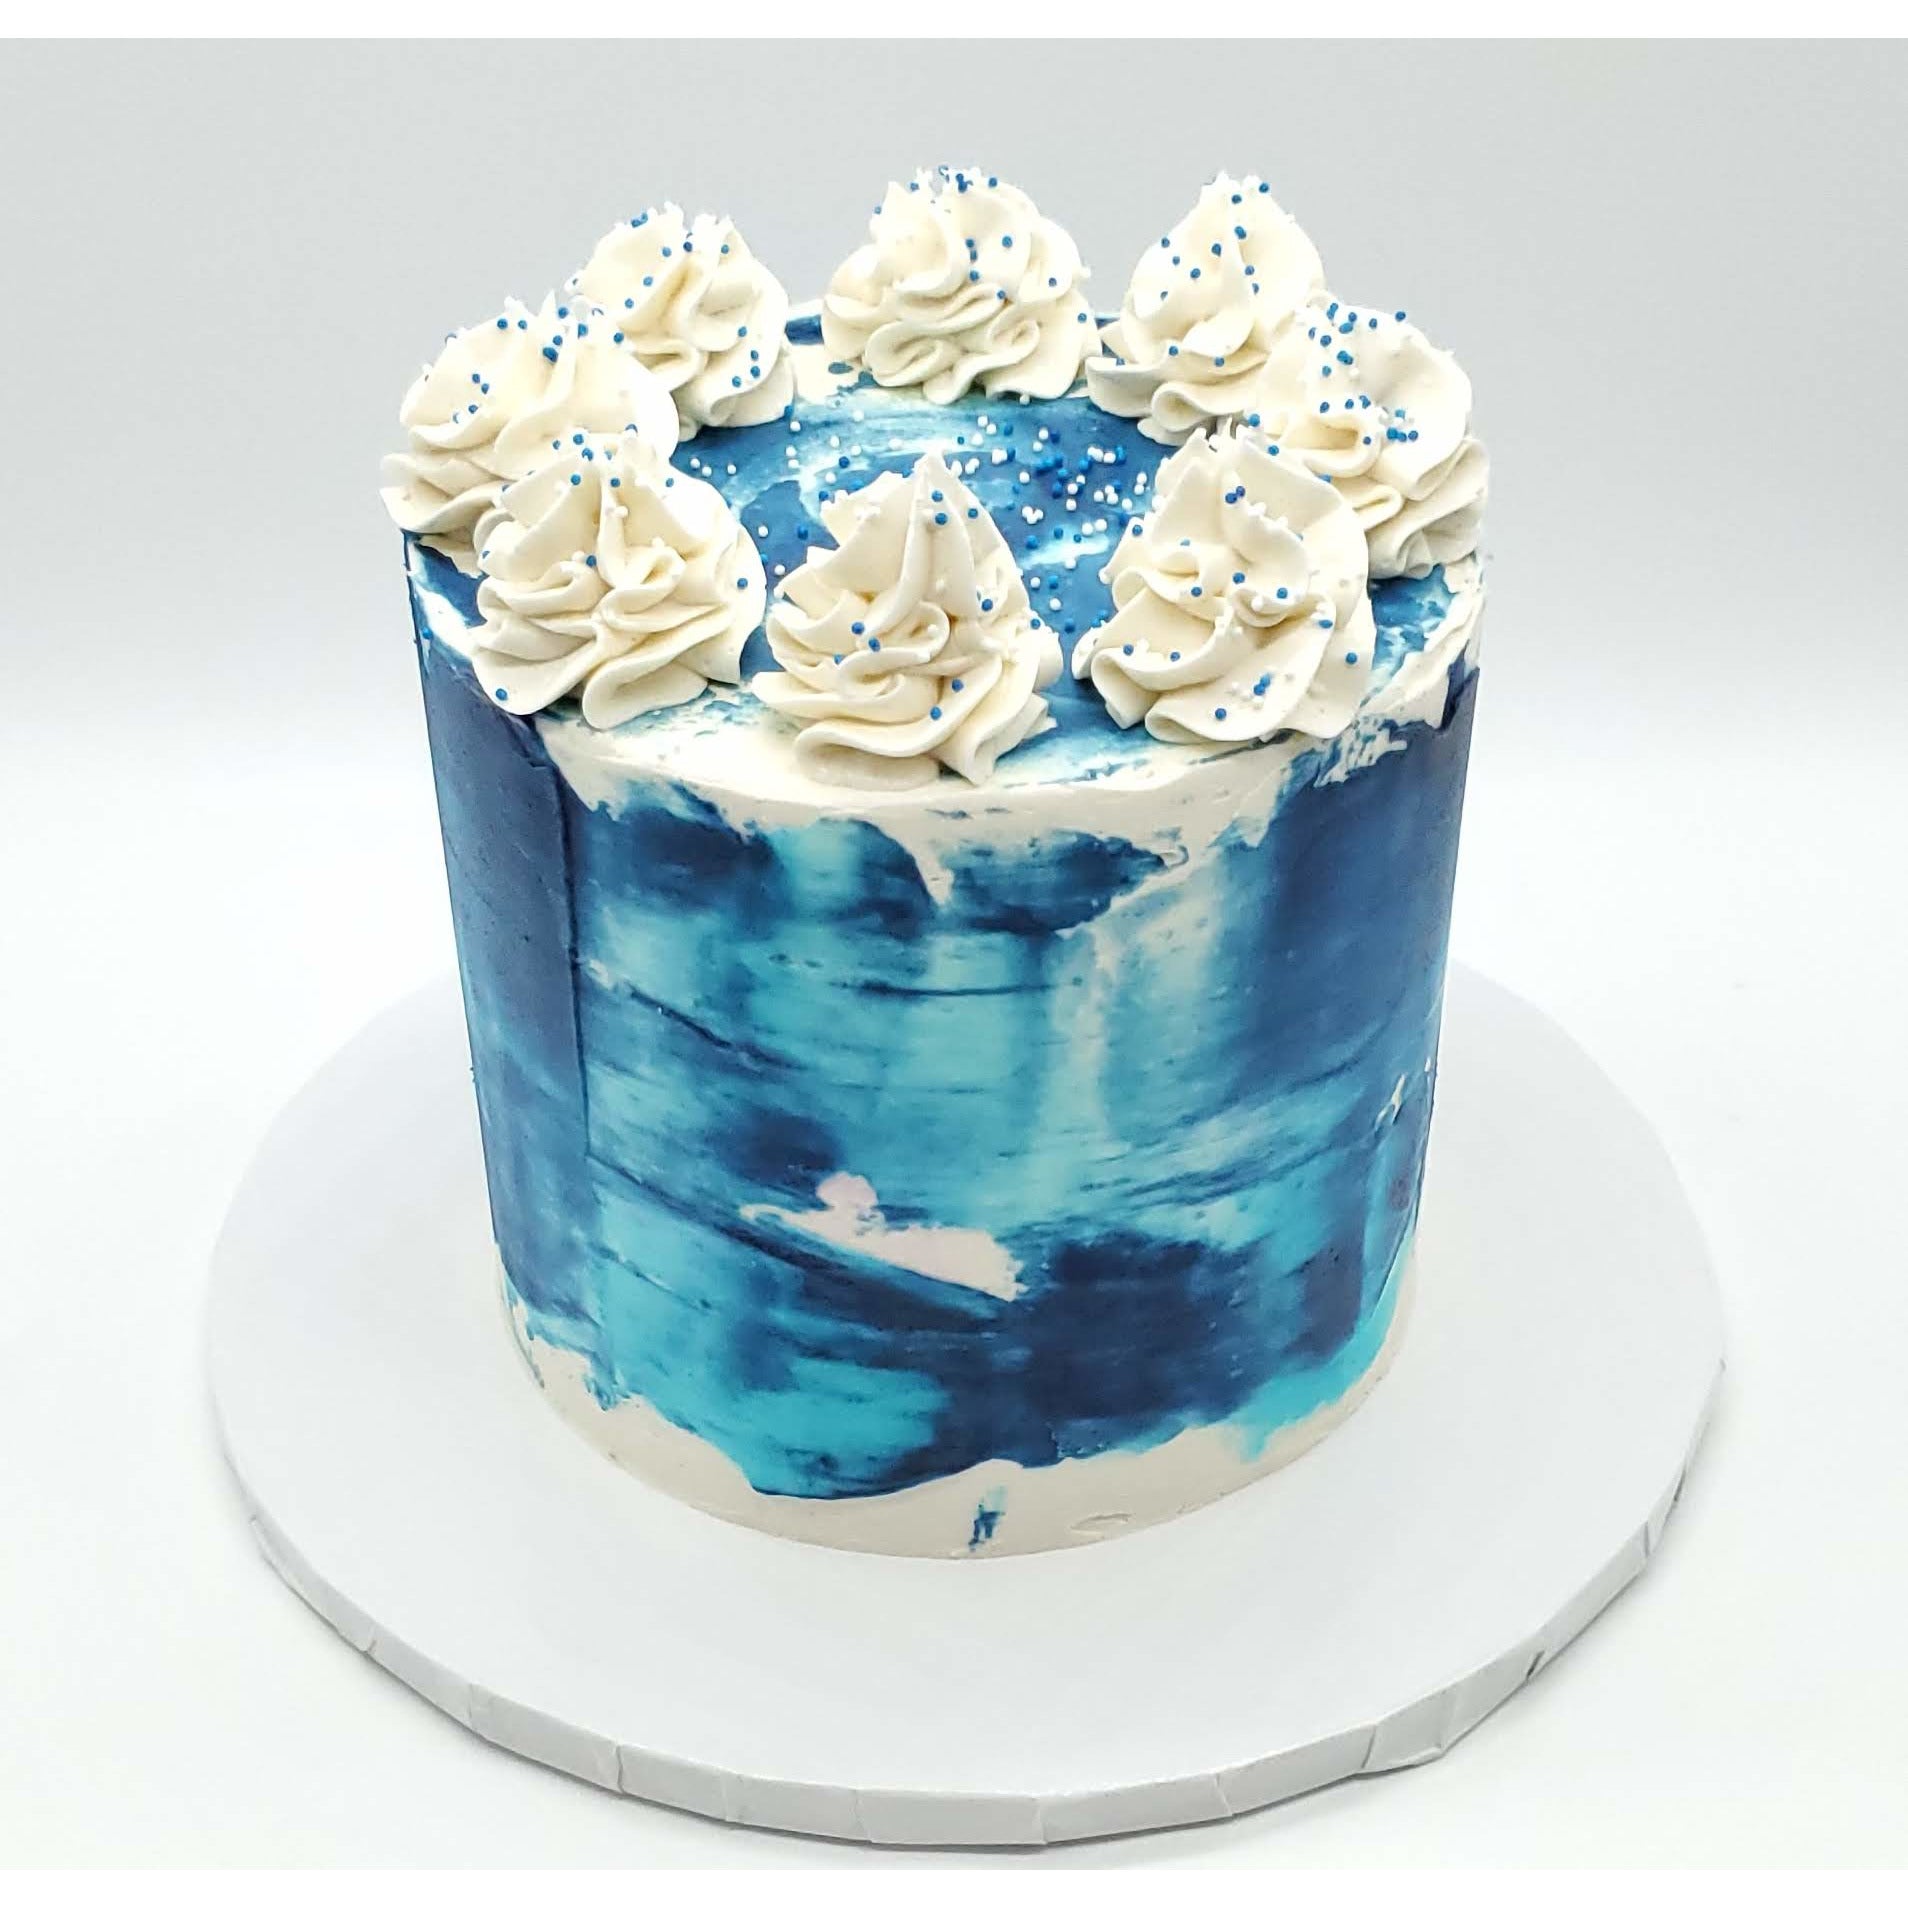 6 Inch Blue Tōn'd Cake with Frosting and Sprinkles on top